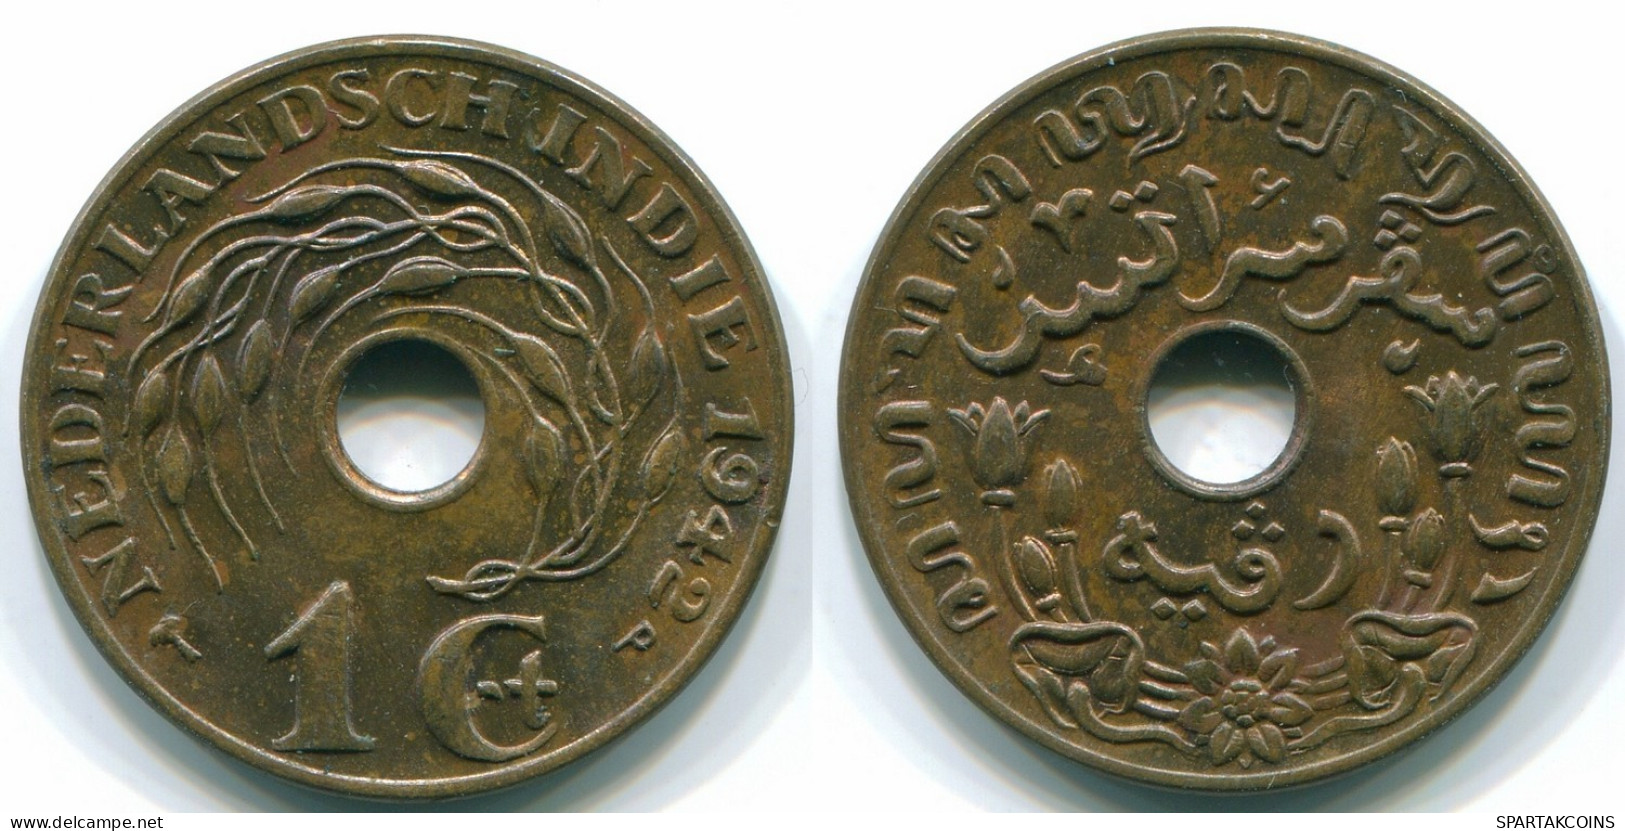 1 CENT 1942 NETHERLANDS EAST INDIES INDONESIA Bronze Colonial Coin #S10314.U.A - Indie Olandesi